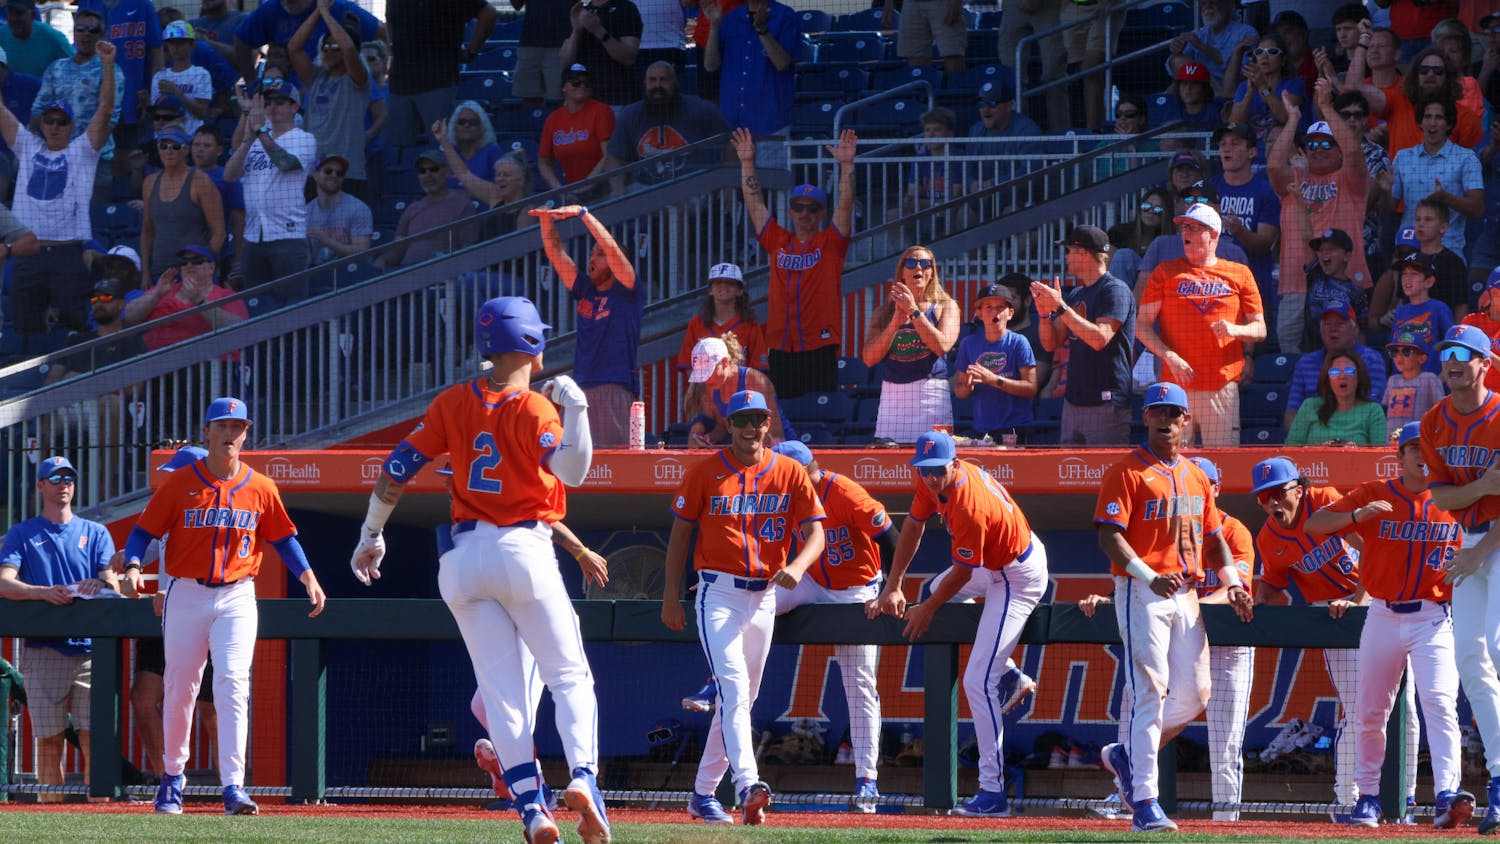 Florida right fielder Ty Evans flips his bat after he hit a home run in the Gators' 14-4 win over the Miami Hurricanes Sunday, March 5, 2023.